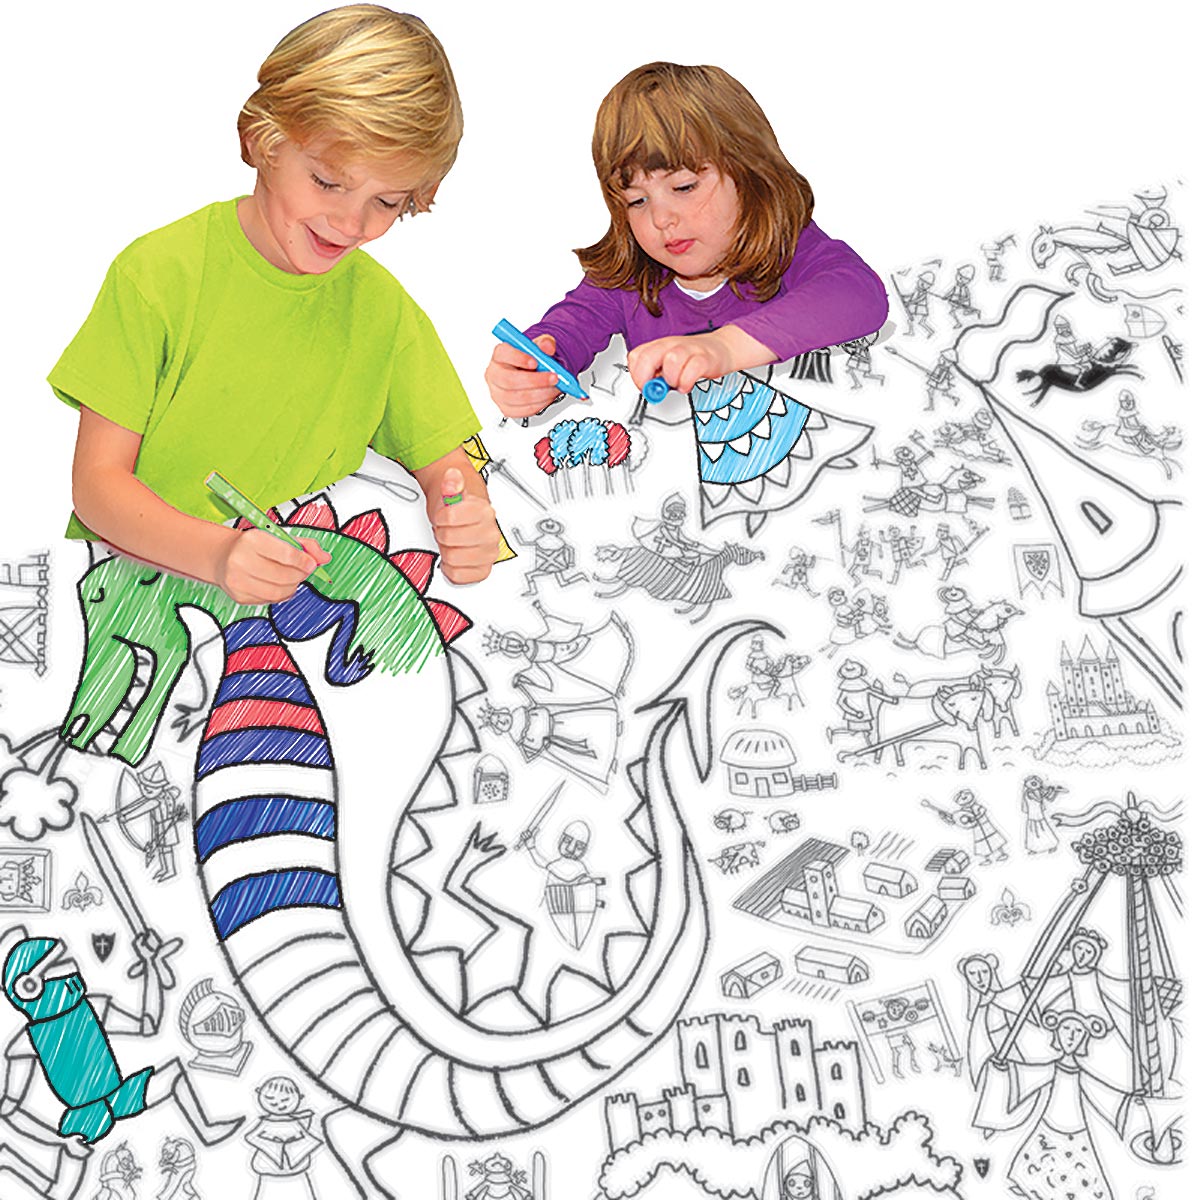 girl and boy colouring together at table